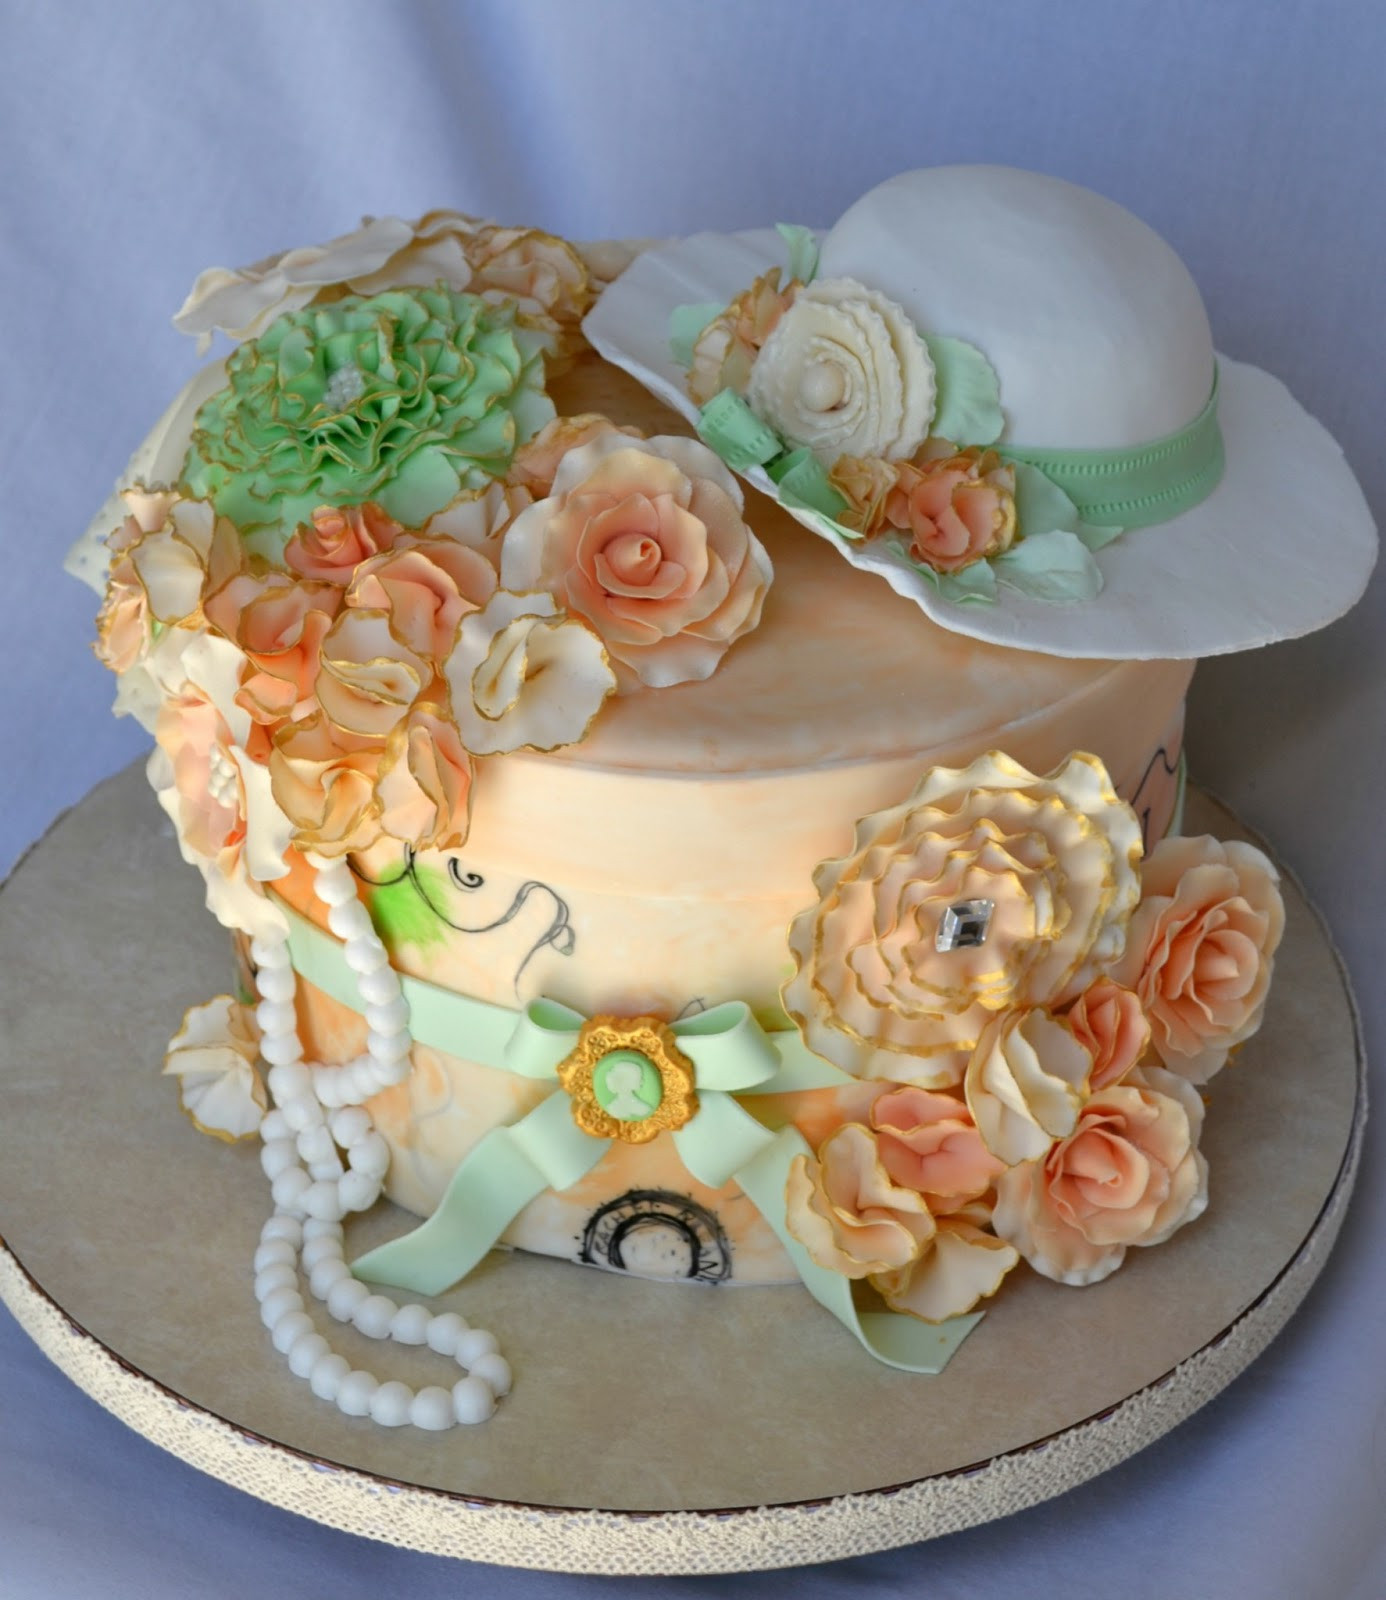 Vintage Birthday Cake
 Delectable Cakes Anne of Green Gables Inspired Vintage